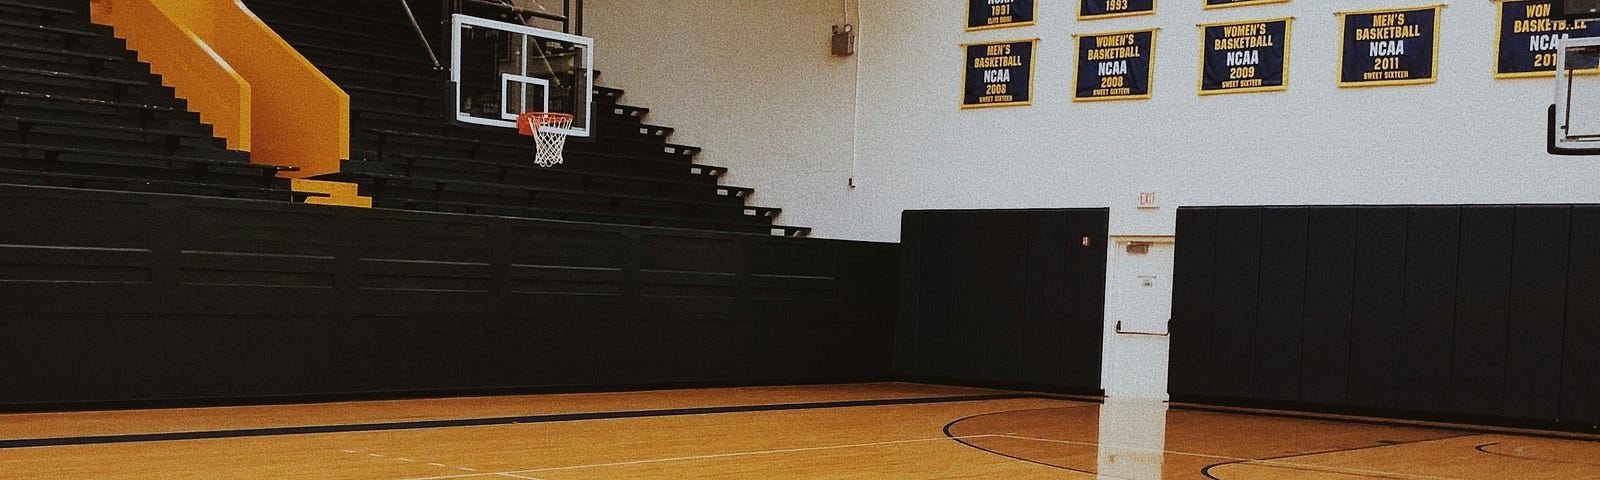 The gym was barren for our most recent basketball game.